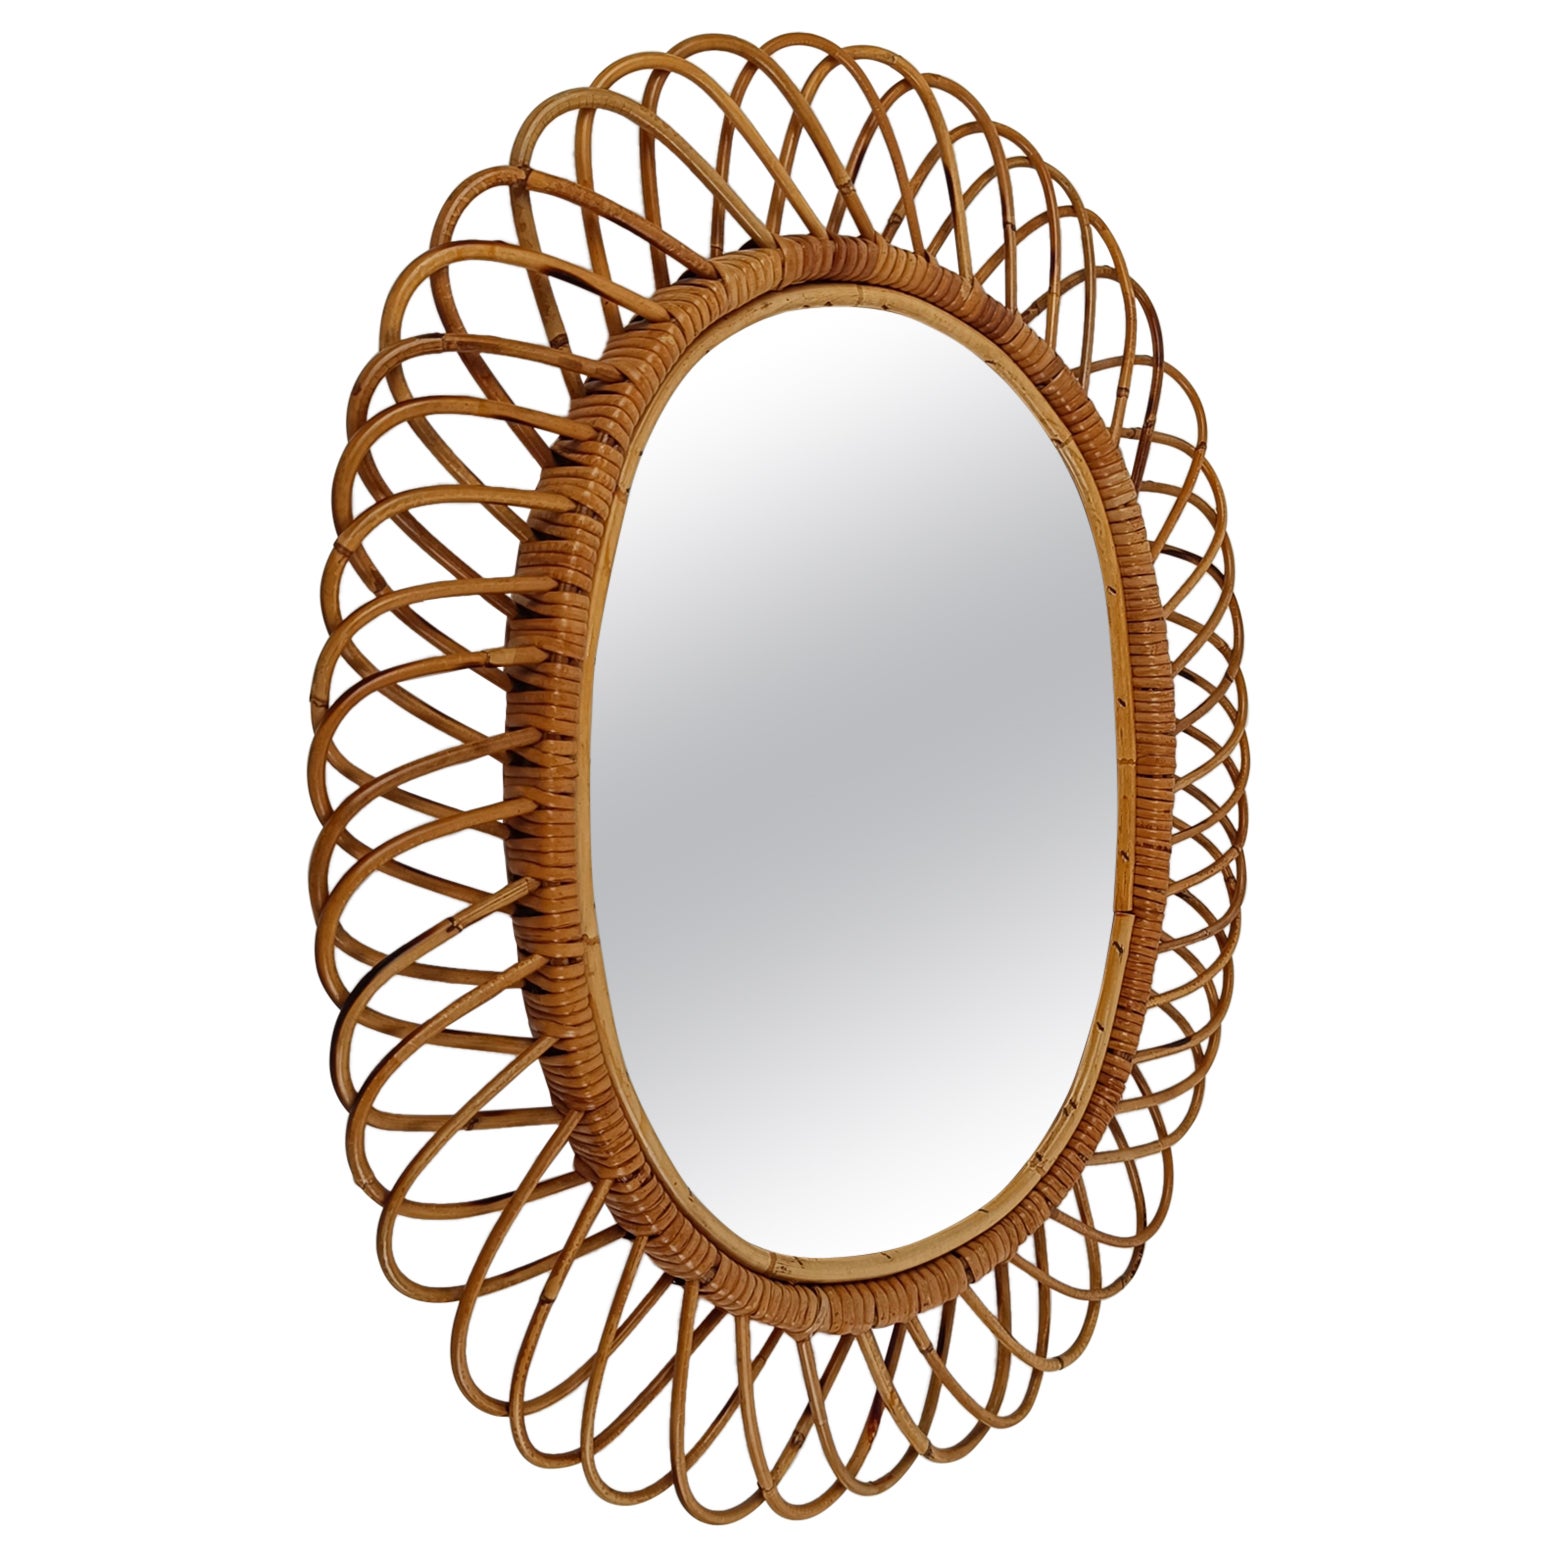  Italian Oval Mirror made in Bamboo, Cane and Rattan in the Riviera Style 1960s  For Sale